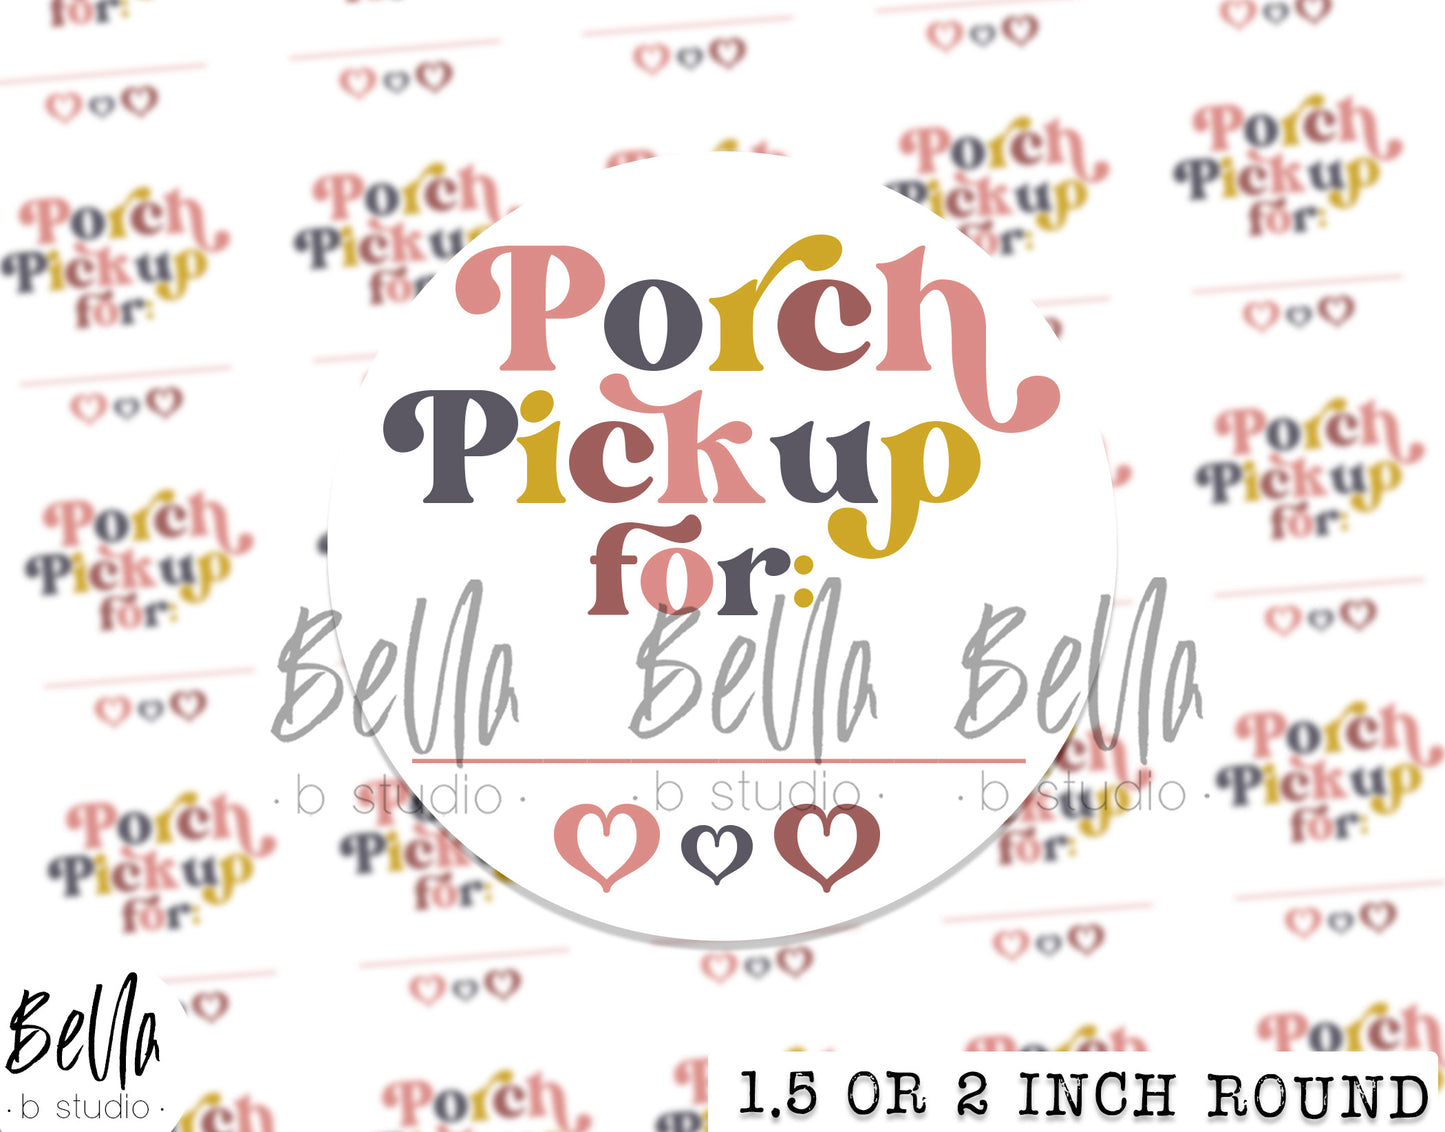 Retro - Porch Pickup Sticker Sheet - Small Business Packaging Stickers